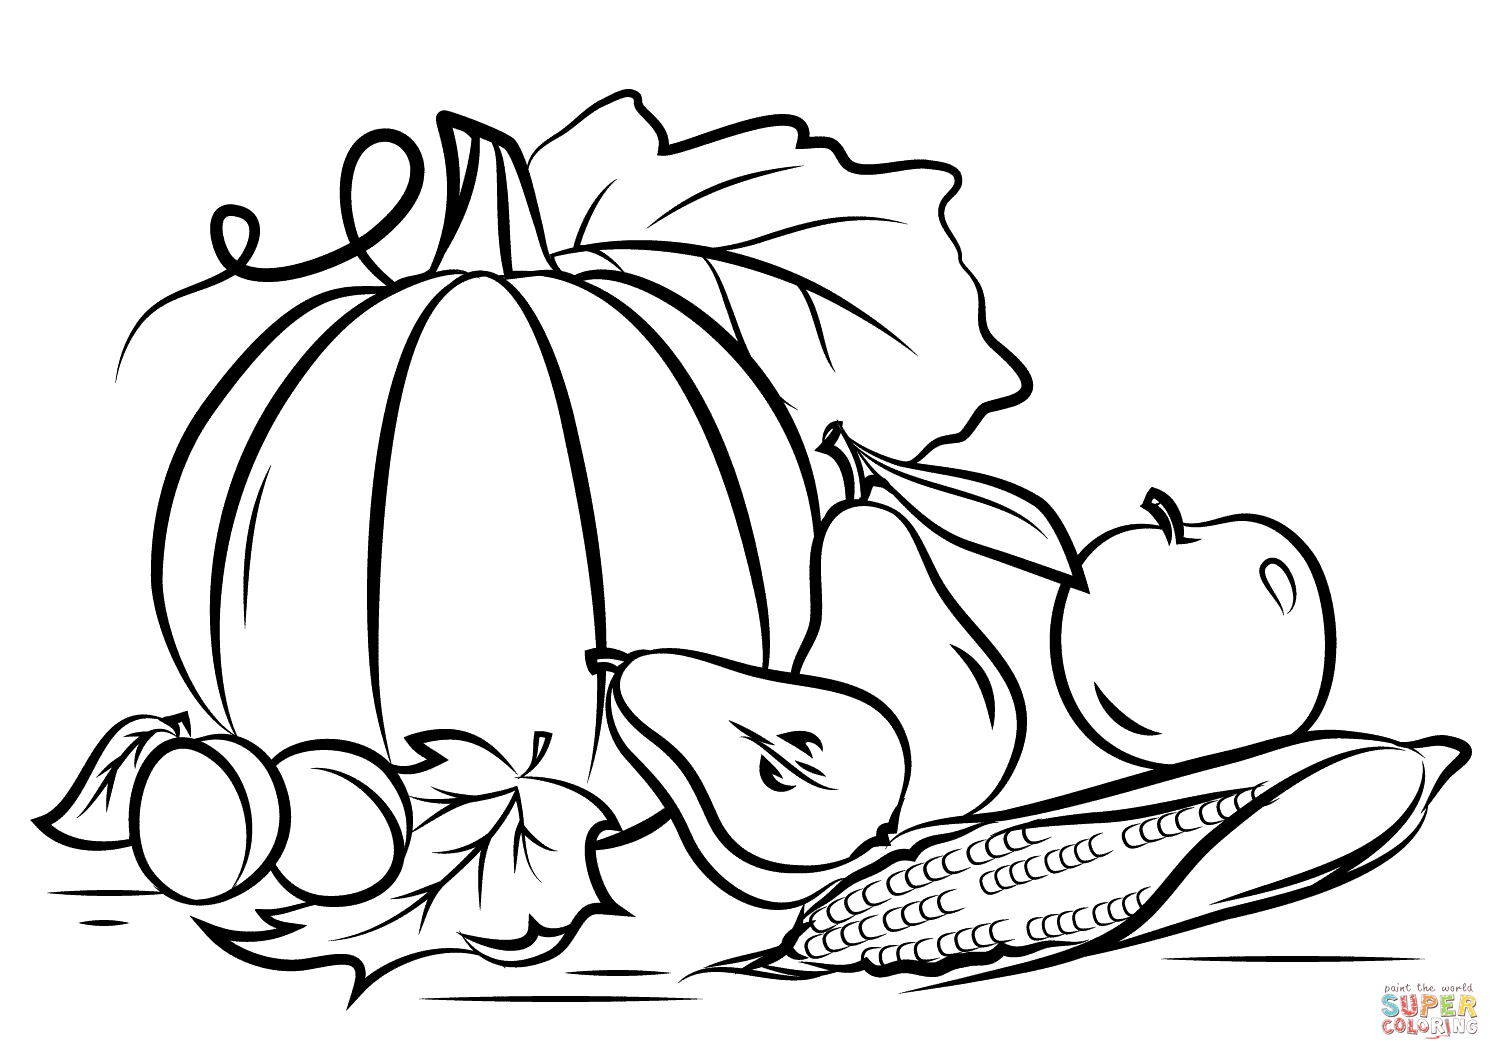 Autumn Harvest Coloring Page | Free Printable Coloring Pages - Fall Printable Coloring Pages Free